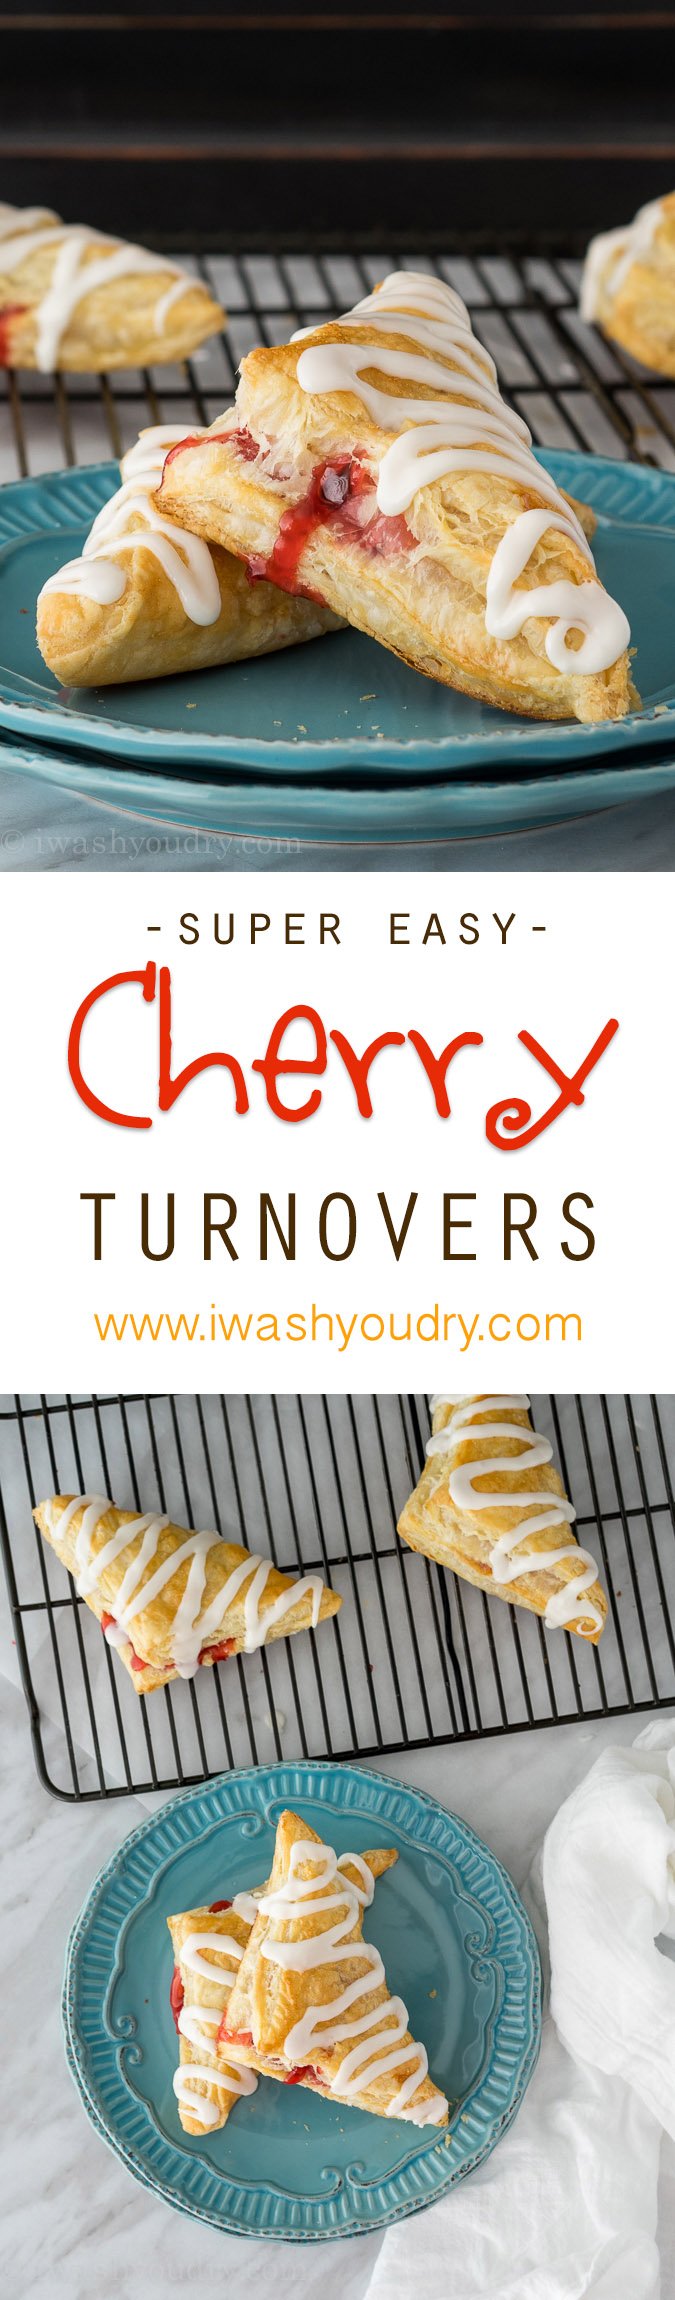 Only a few simple ingredients for these Super Easy Cherry Turnovers!